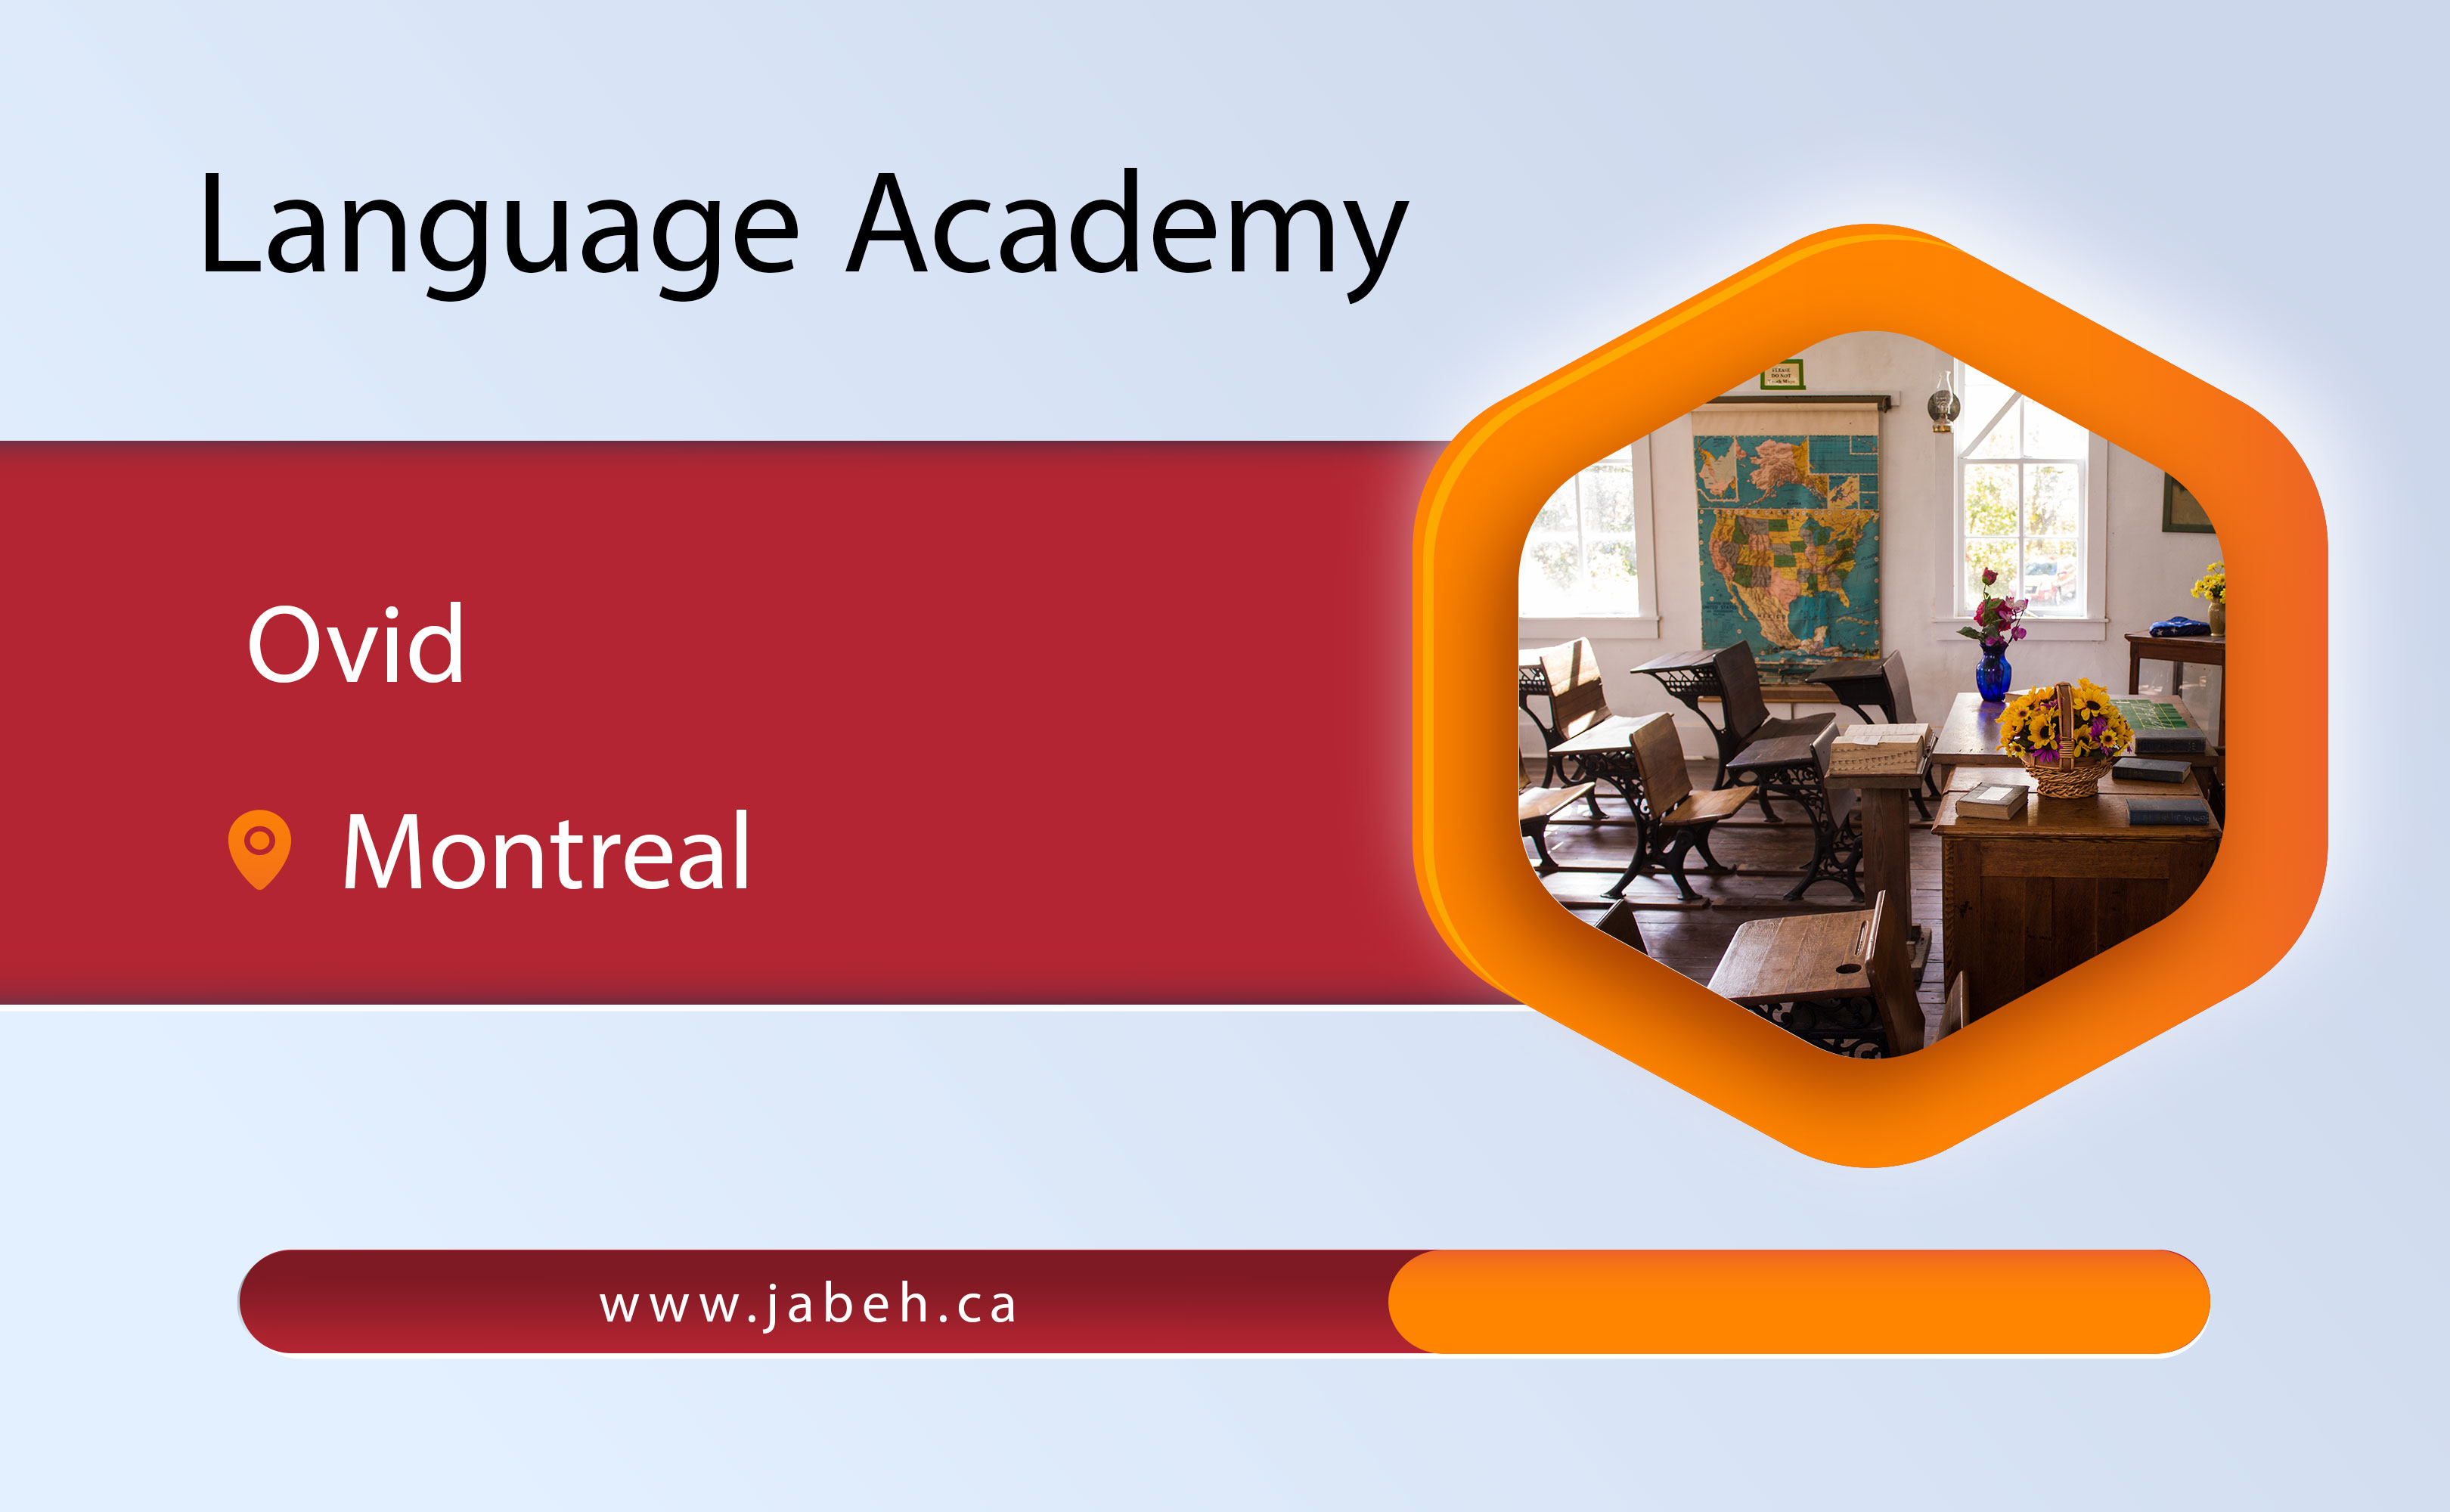 Ovid Language Academy in Montreal